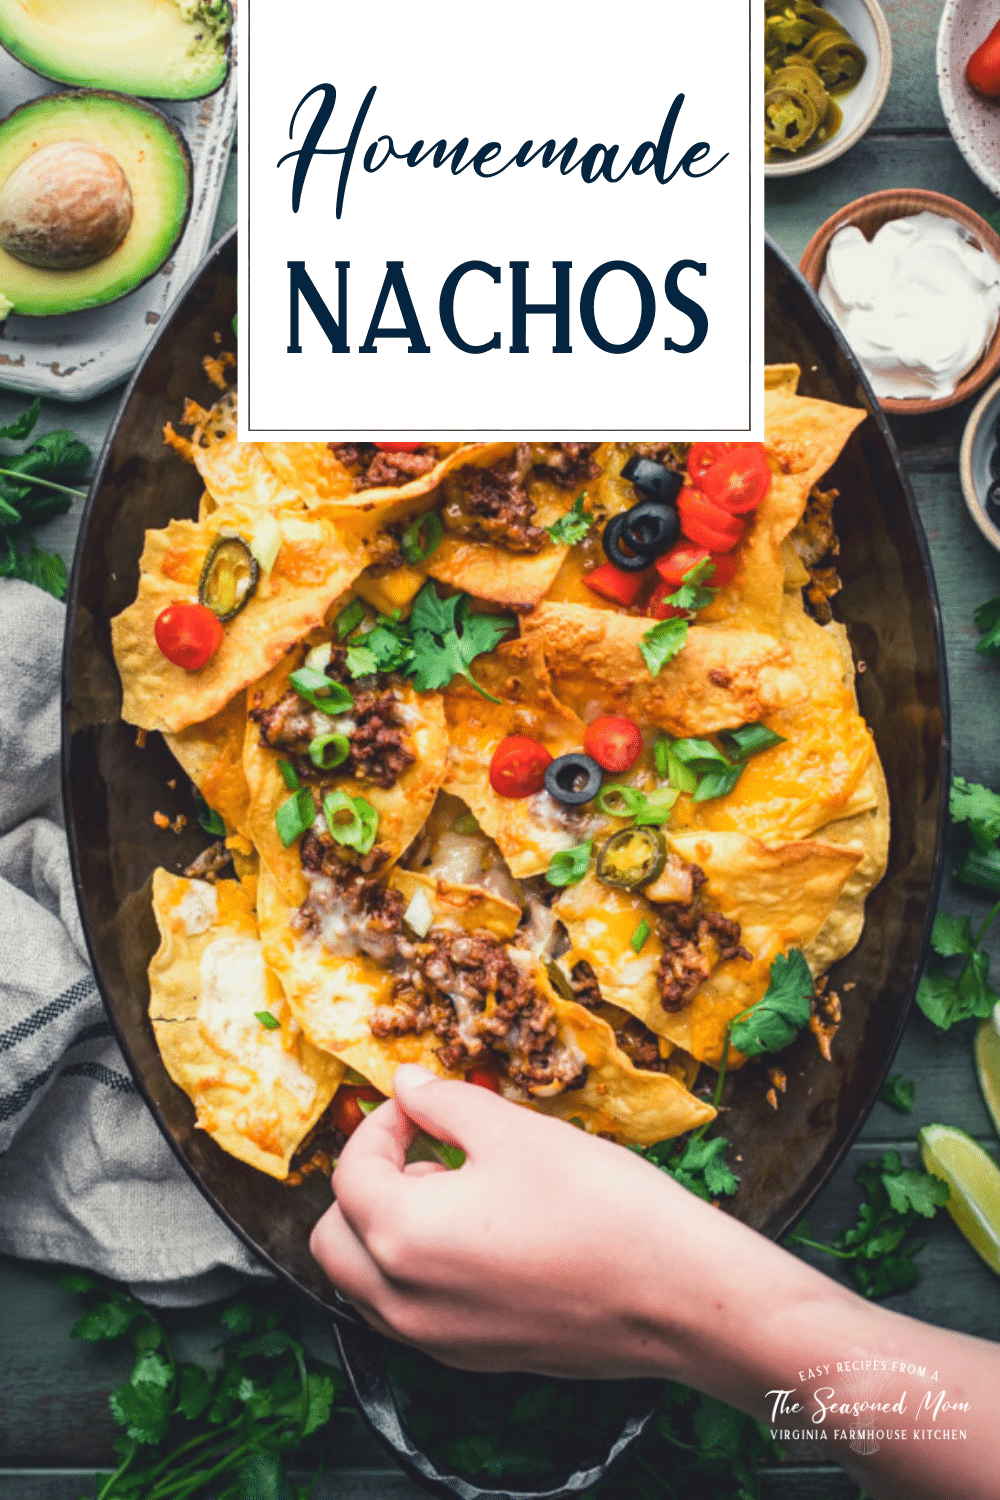 Overhead image of a tray of homemade nachos with text title overlay